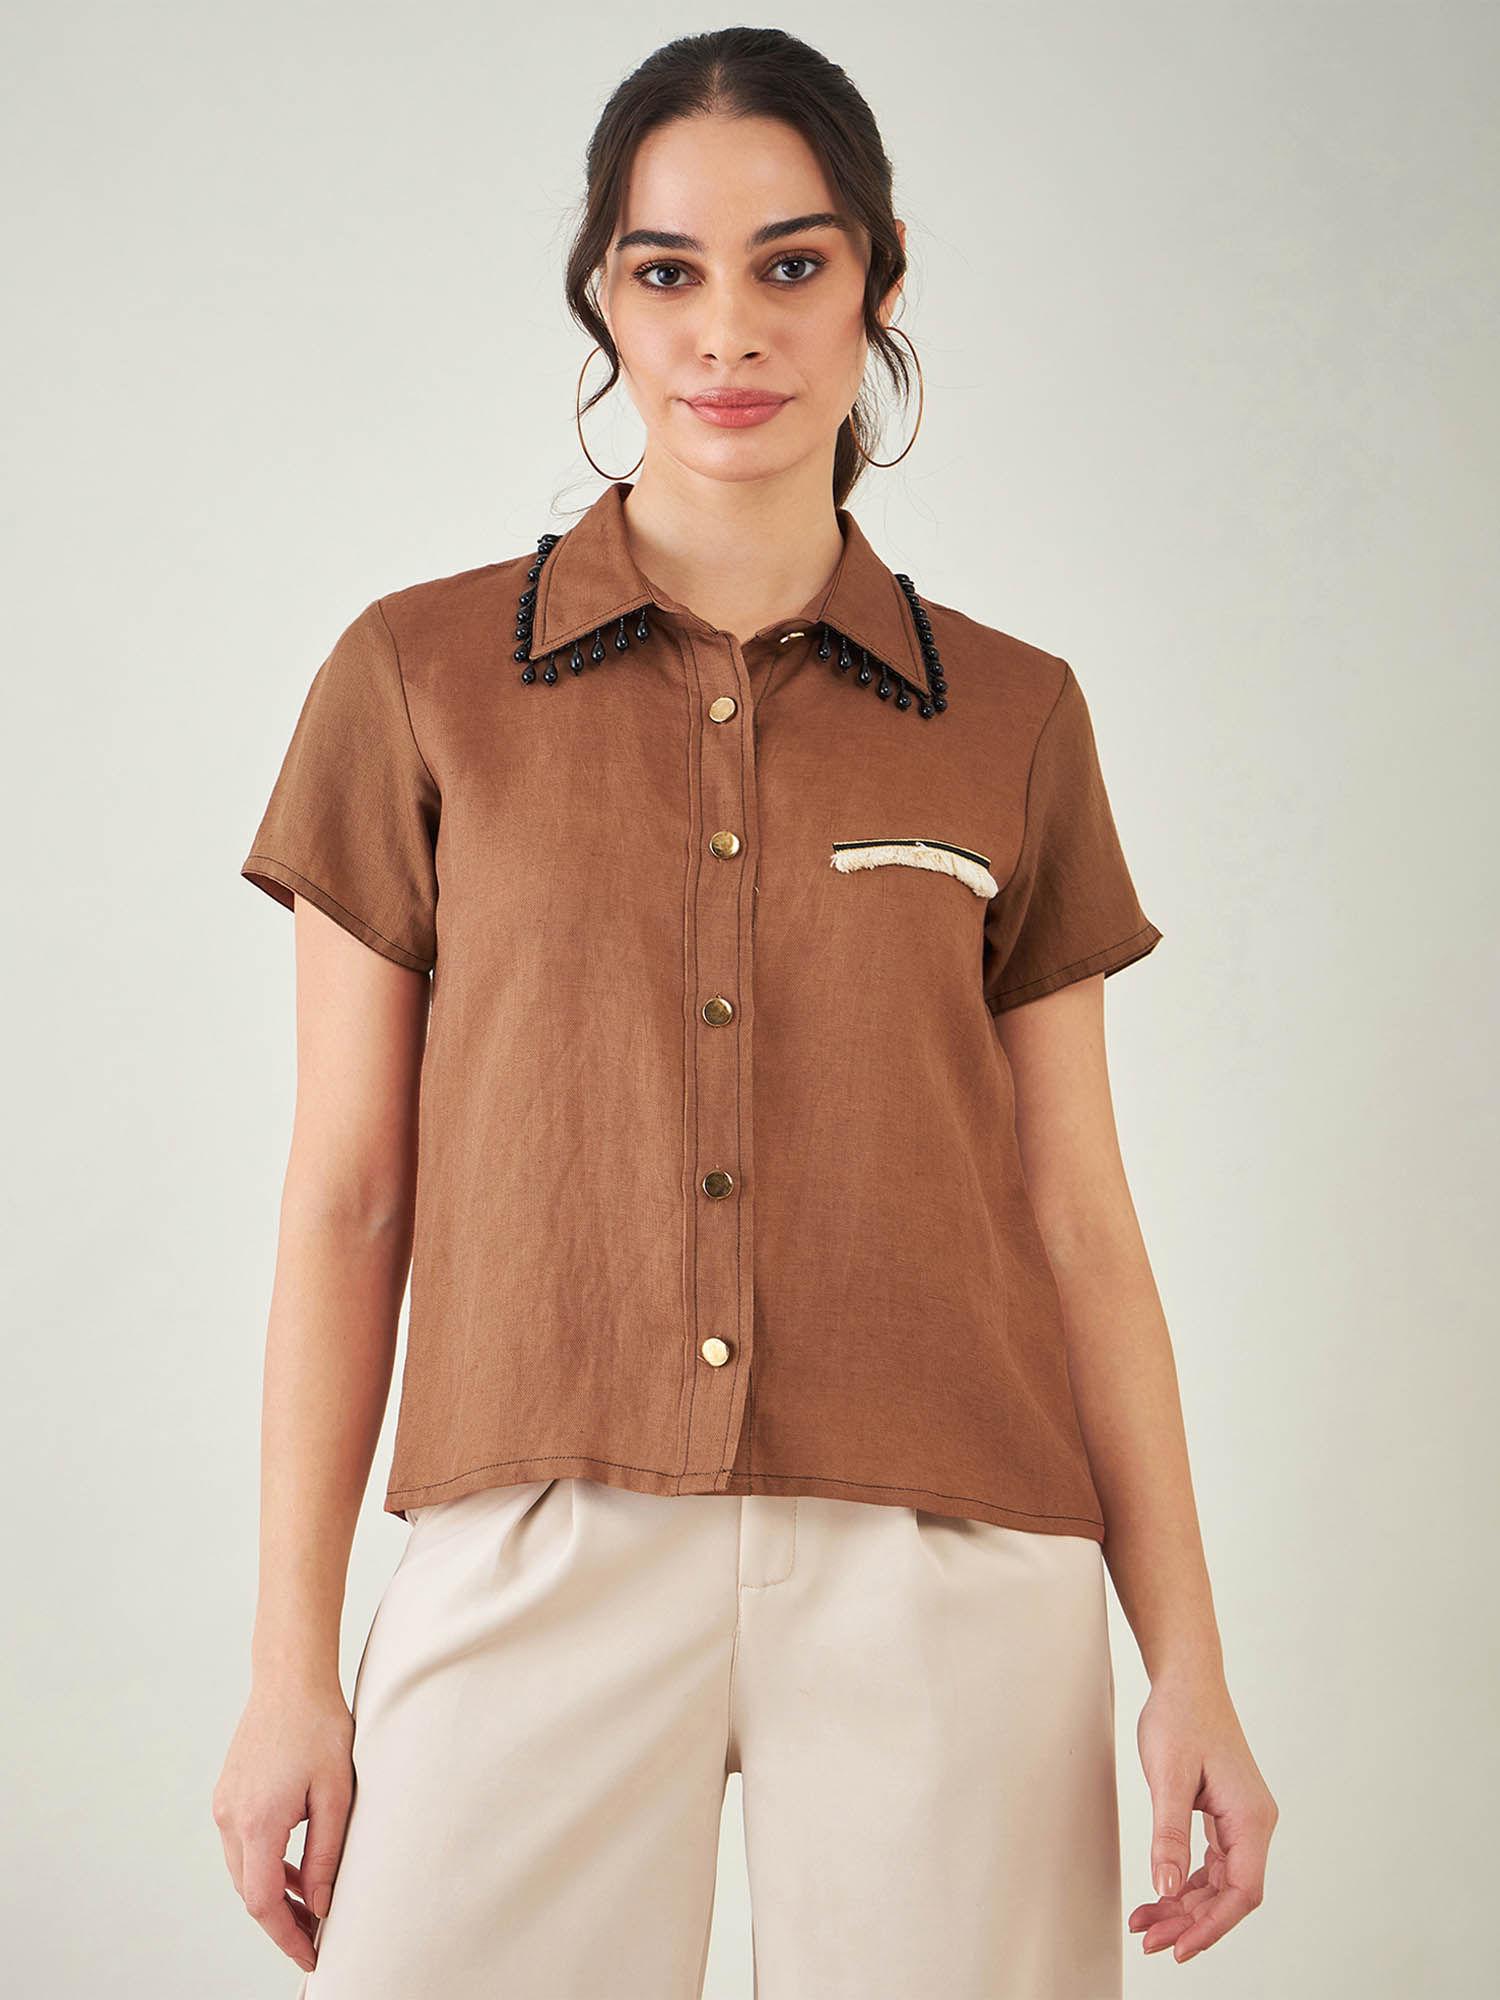 brown linen shirt with lace detail